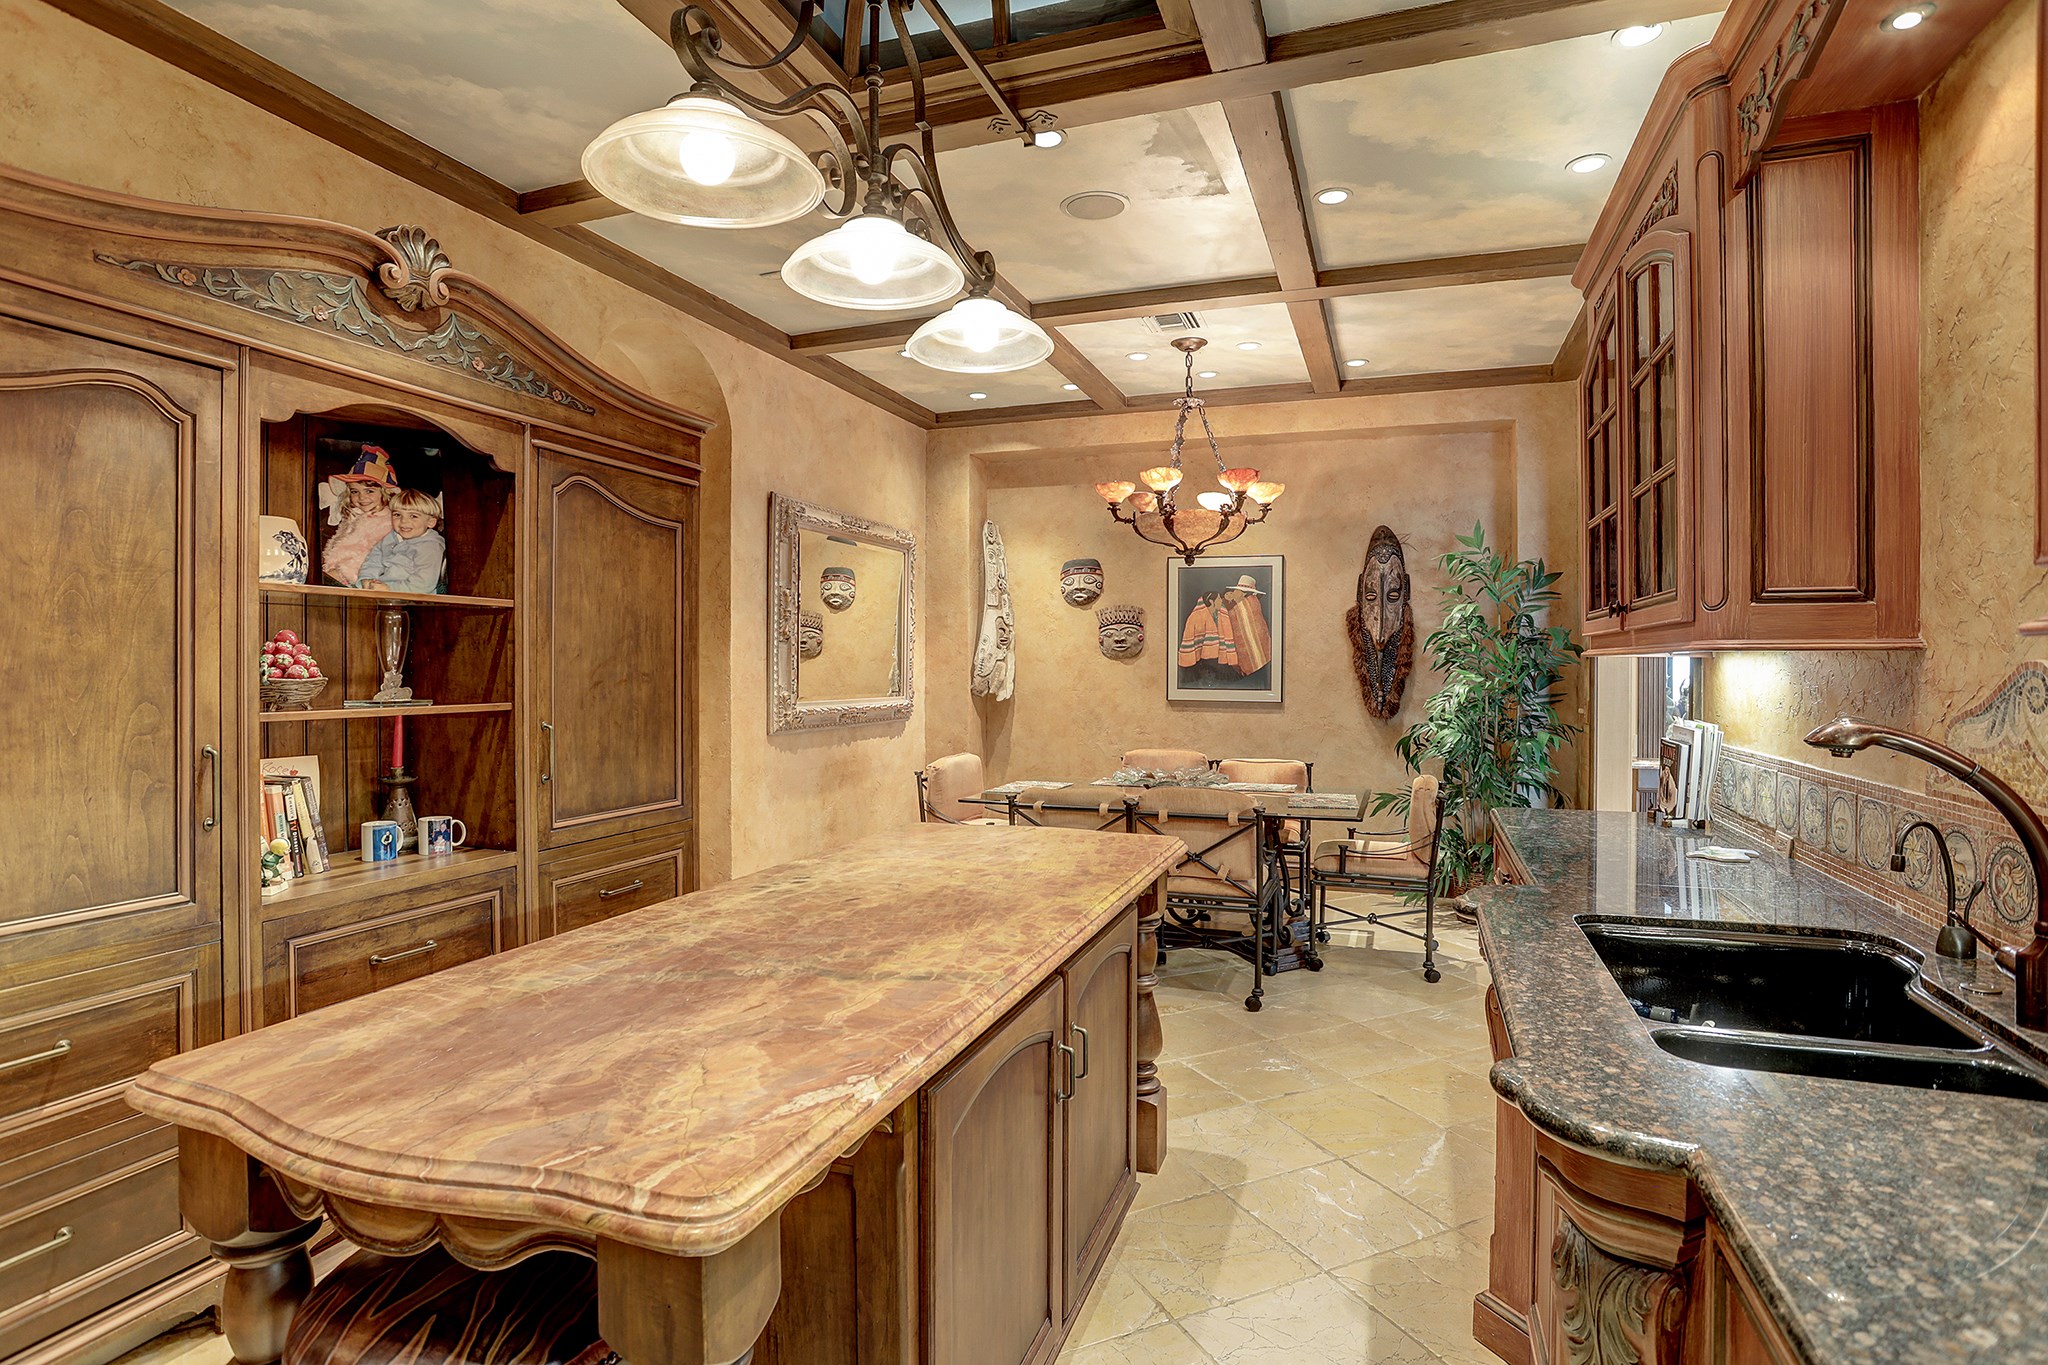 There is a refectory table-style island with marble deck, seating and storage.  The bull nose granite countertops have mosaic travertine tile backsplash with antique Italian mythological tile inserts.